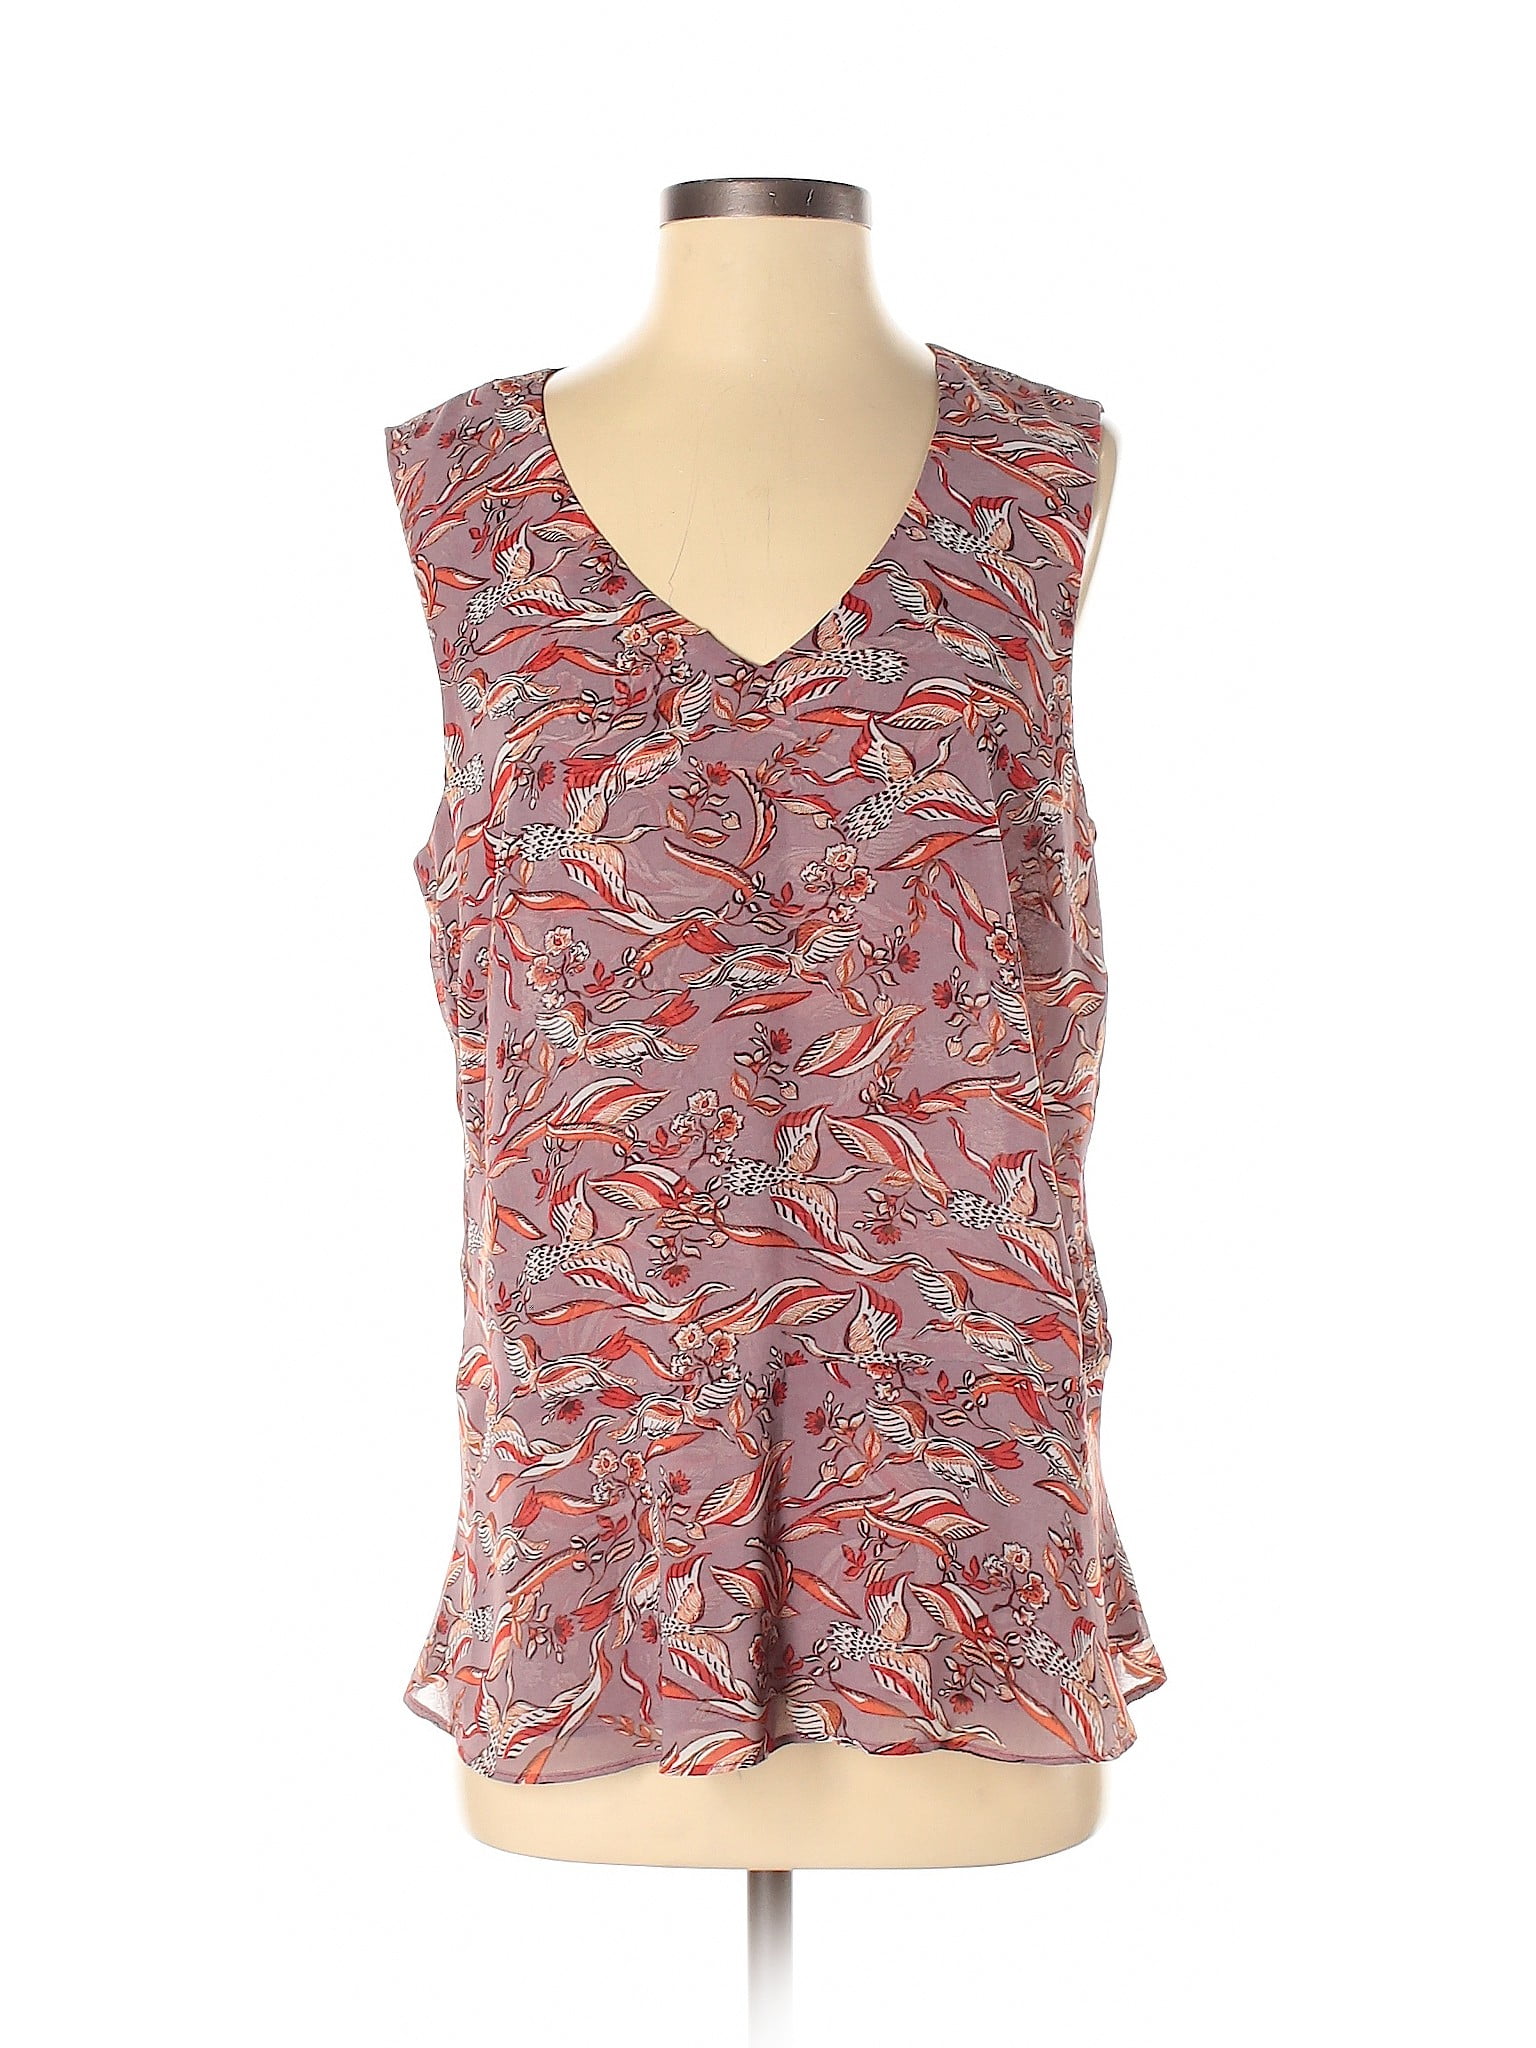 cabi Clothing - Pre-Owned CAbi Women's Size M Sleeveless Blouse ...